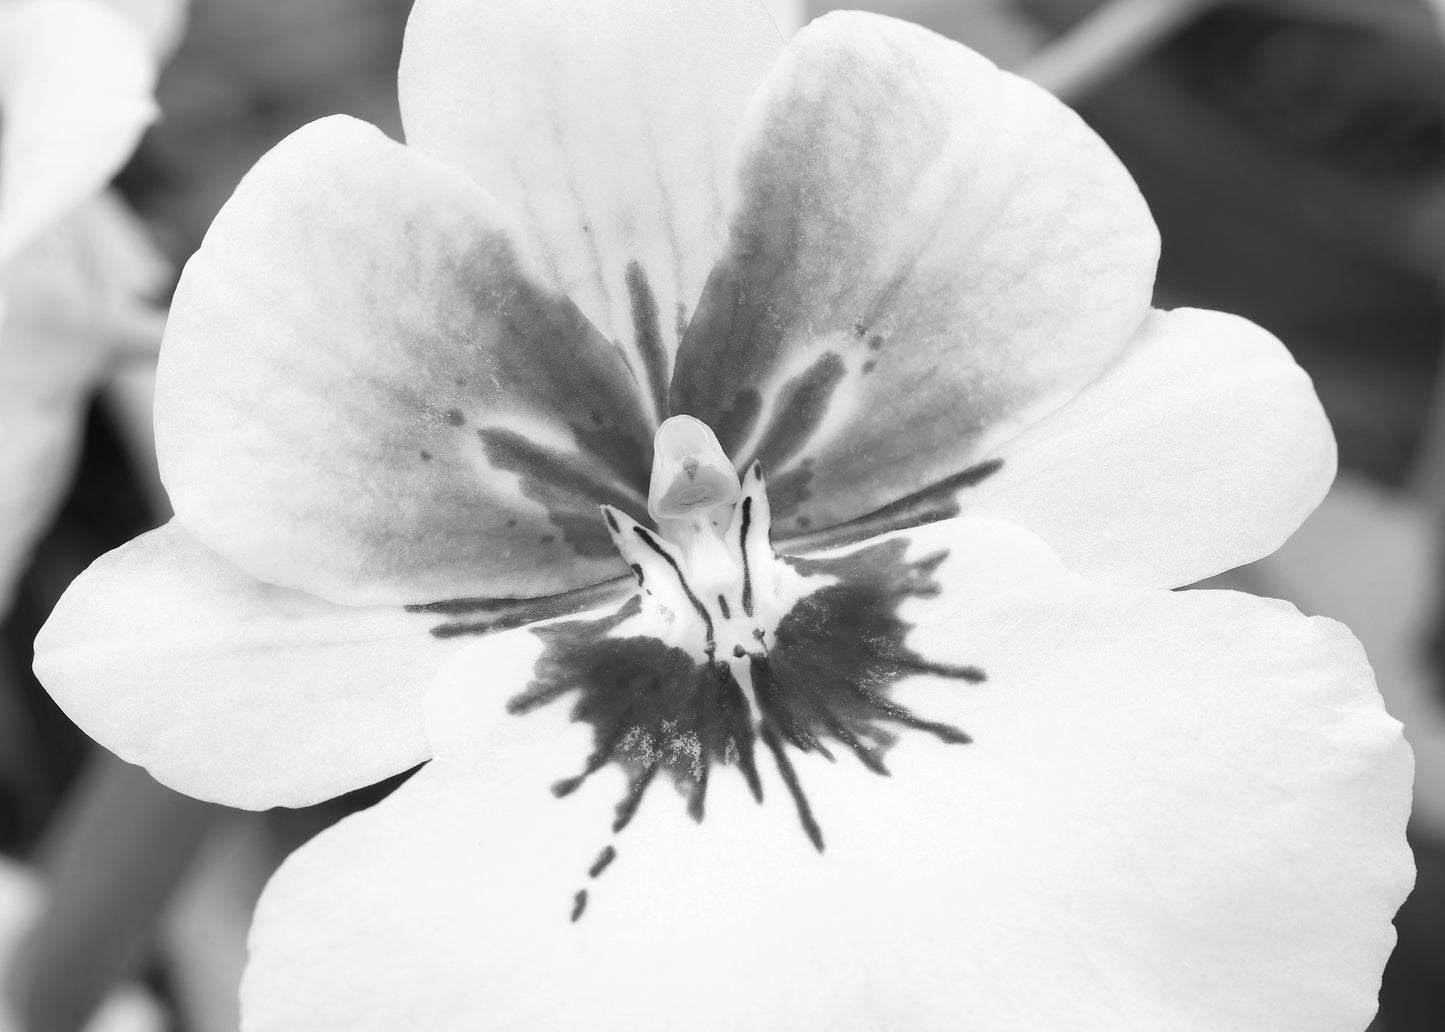 Black and white orchid print, Pansy Orchid photo, large orchid wall art, over bed wall decor, floral gift, orchid lover gift, 5x7 to 32x48"